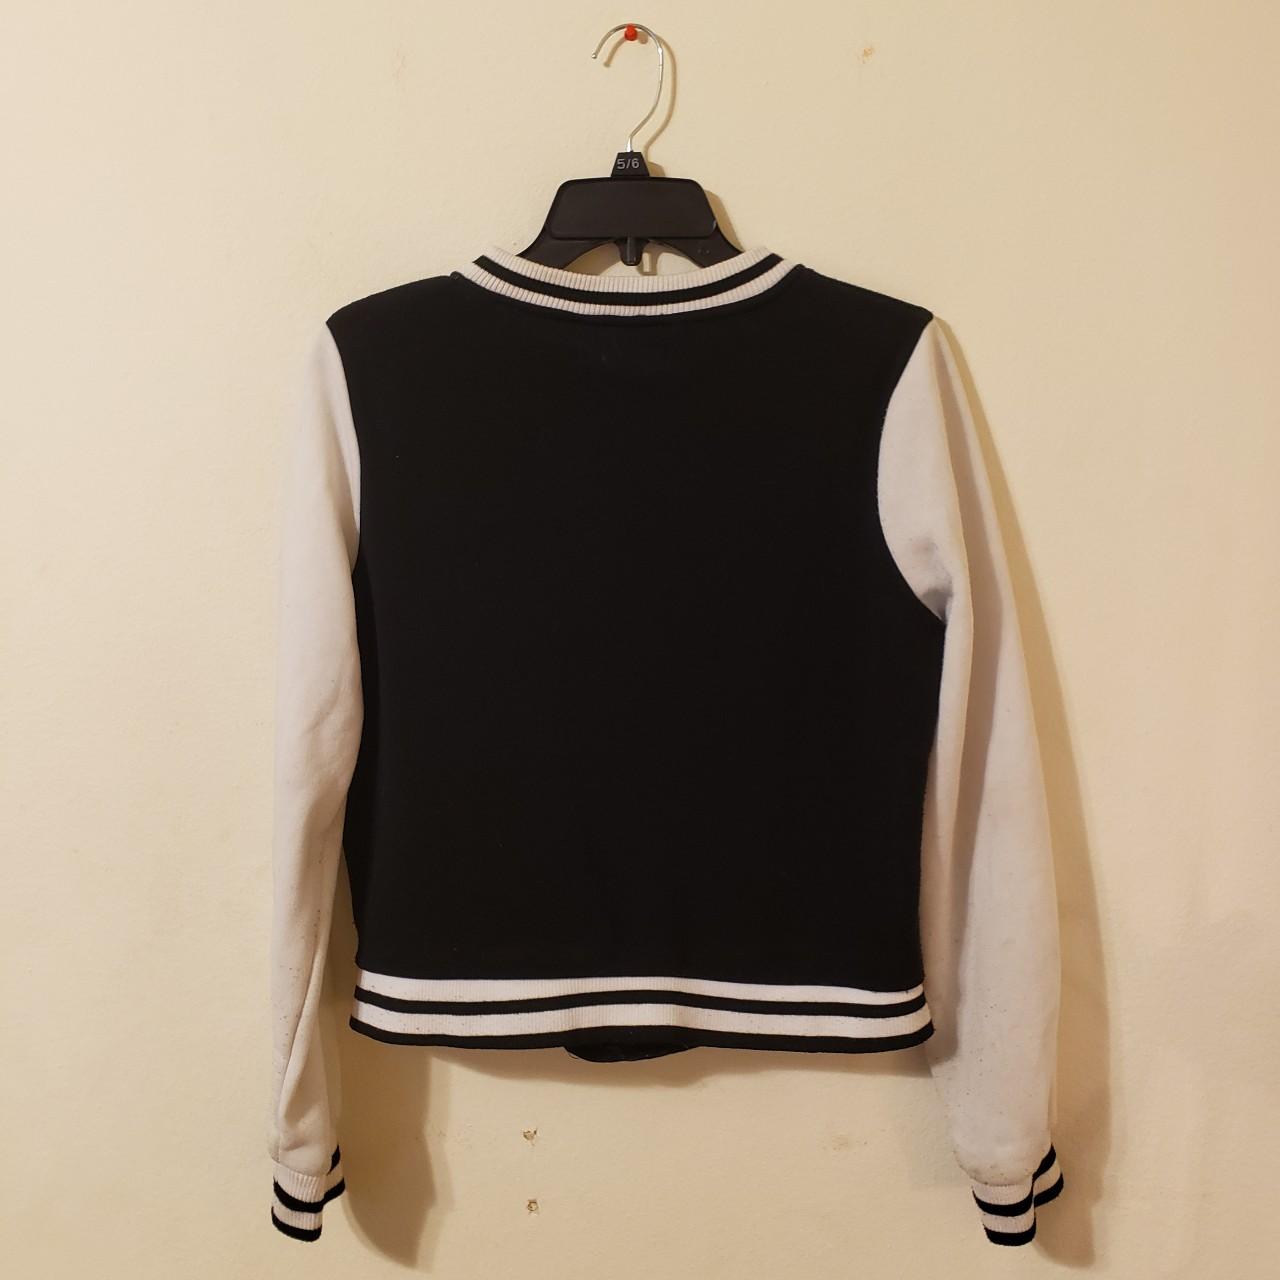 New Look Women's Black and White Jacket (2)